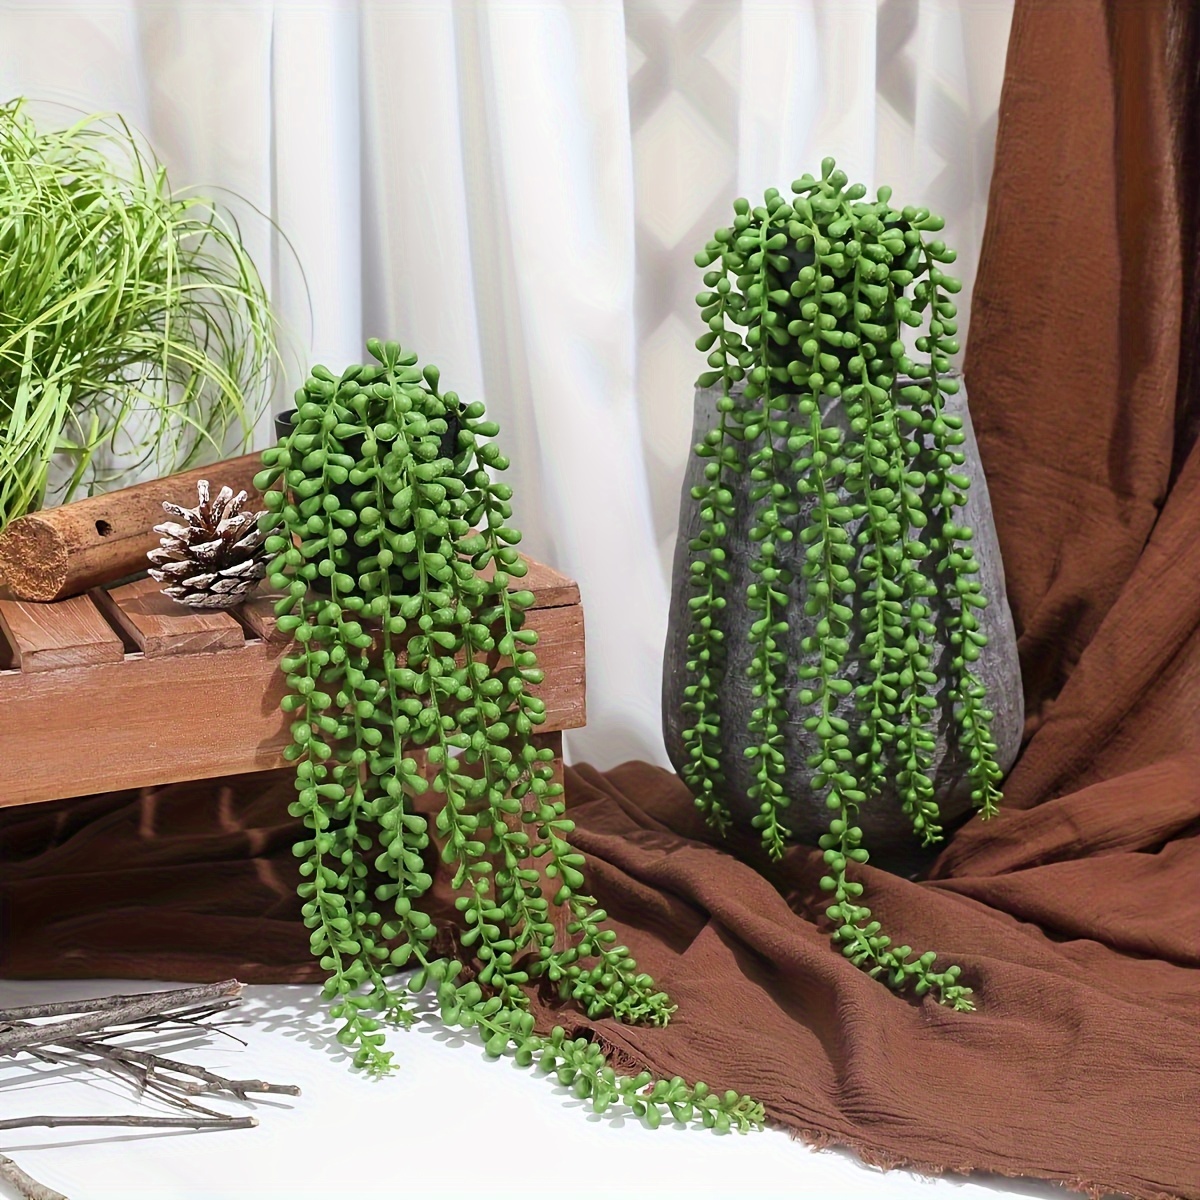 

2-piece Faux Succulent Hanging Plants - String Of Pearls Greenery For Home & Garden Decor, Perfect For Weddings, Parties, And Spring/summer Aesthetics Plant Decor Hanging Artificial Flowers